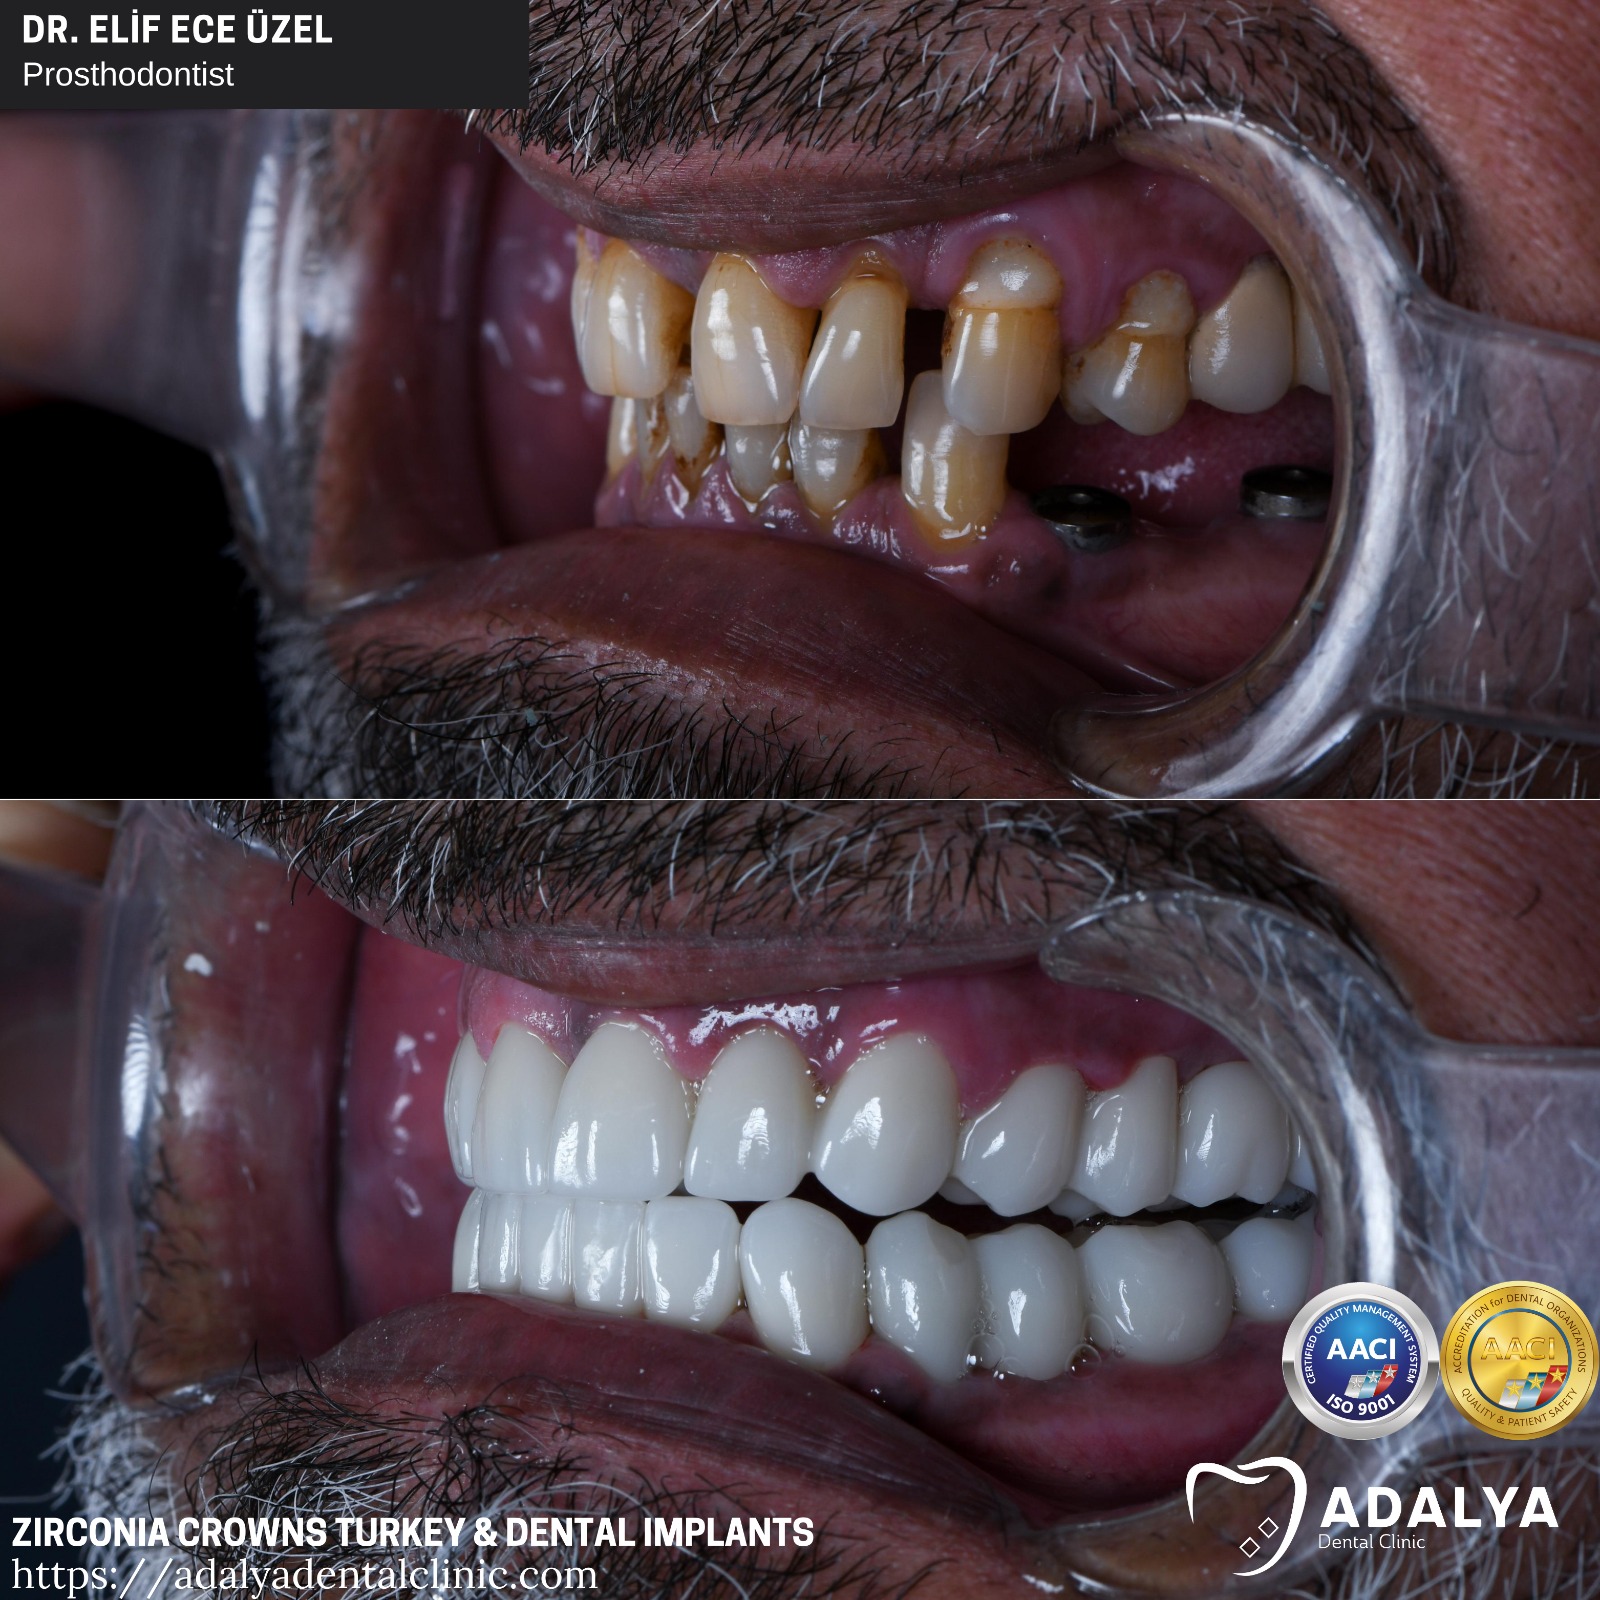 dental clinic turkey antalya zirconia crowns tooth implants price packages cost